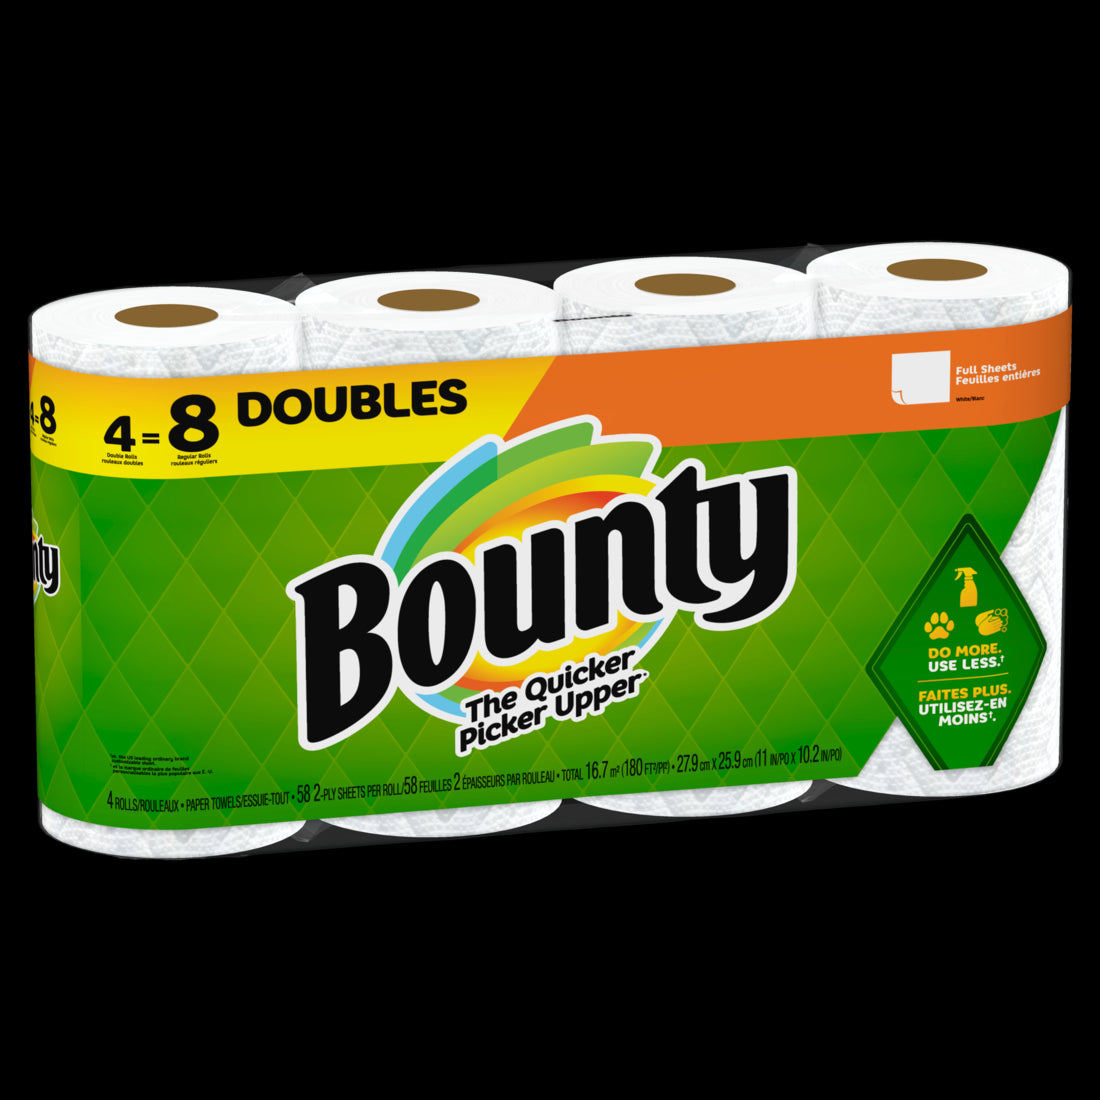 Bounty Full Sheet Paper Towels 4 Double Rolls White 58 Sheets per Roll - 4ct/1pk